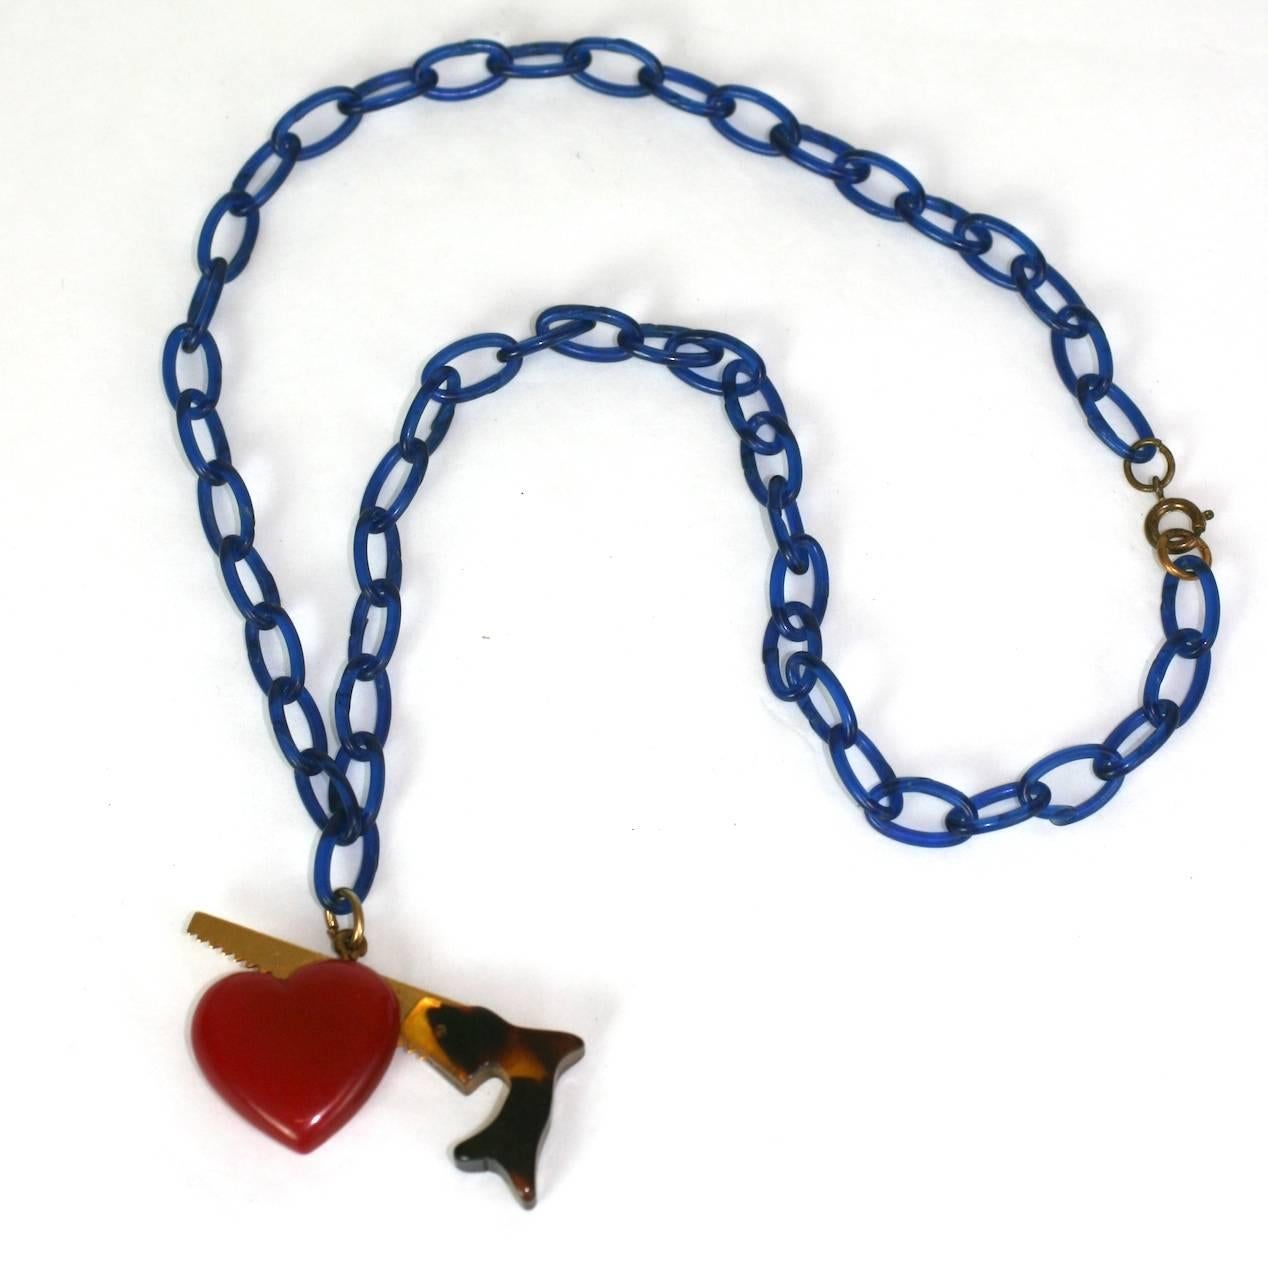 Rare and special Bakelite breaking heart pendant necklace from the 1930's. Composed of finely detailed red and mottled tortoise shell colored bakelite and gilt metal. Suspended from a vivid blue celluloid chain. Sadly, the breaking heart is actually